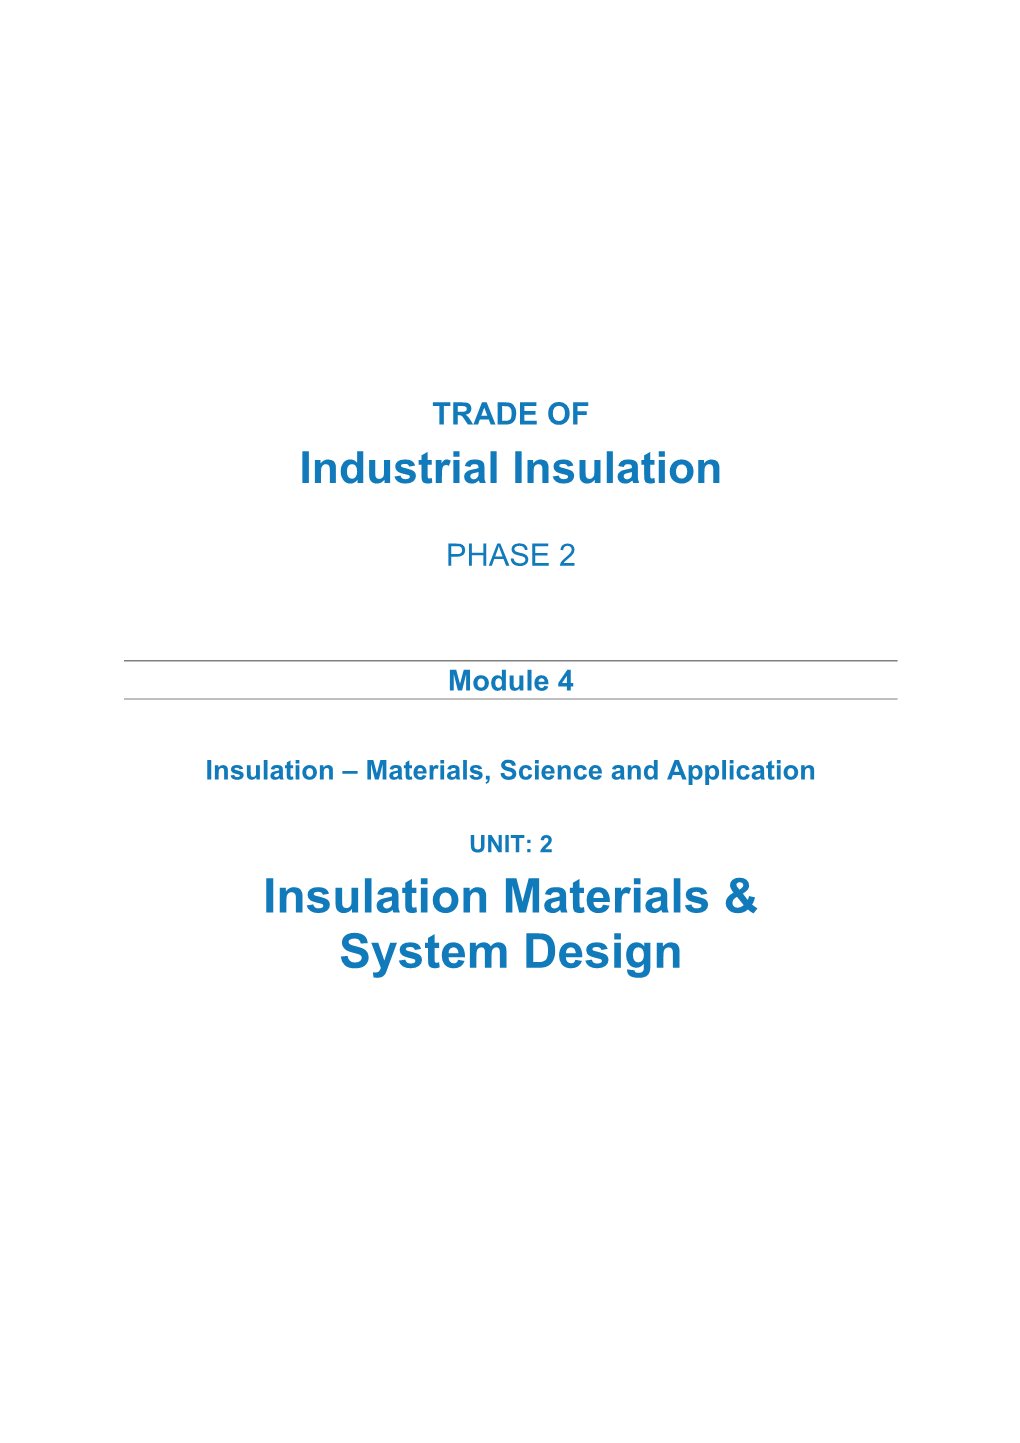 Insulation Materials, Science and Application